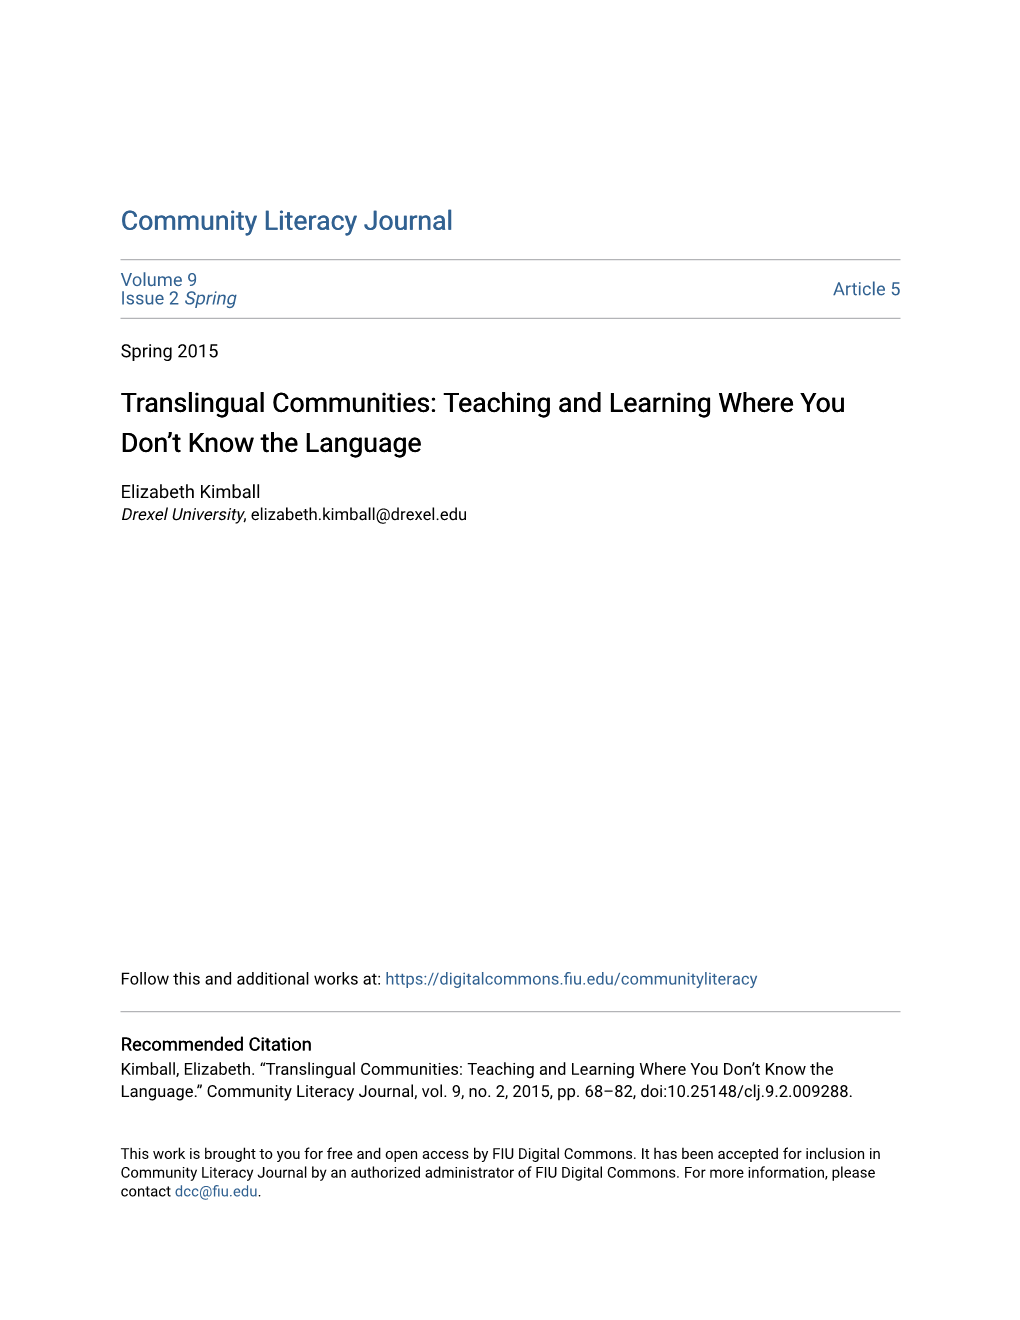 Translingual Communities: Teaching and Learning Where You Don’T Know the Language